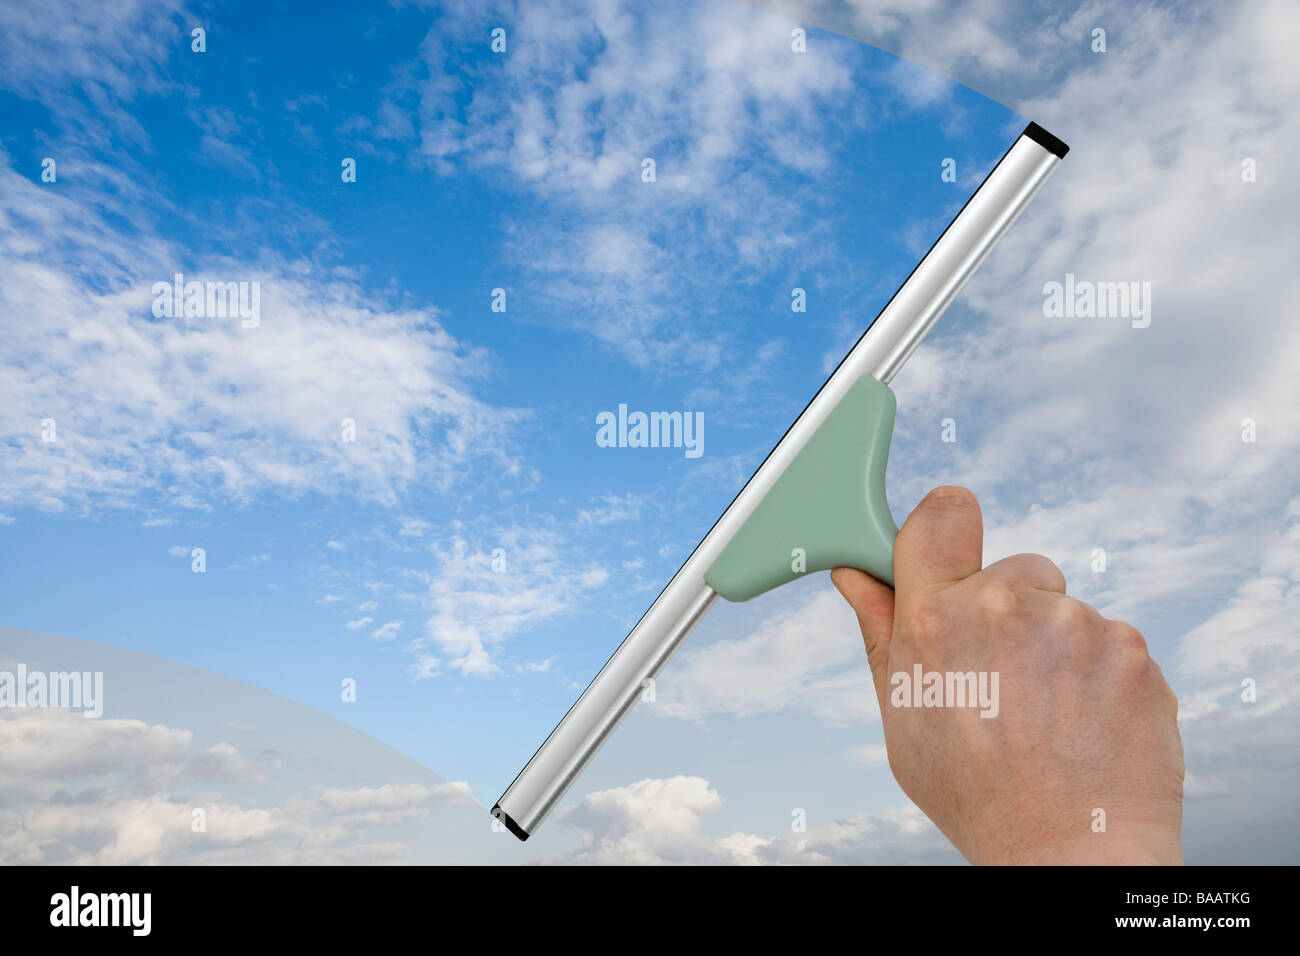 hand cleaning a window with a squeegee, turning dull sky into blue Stock Photo